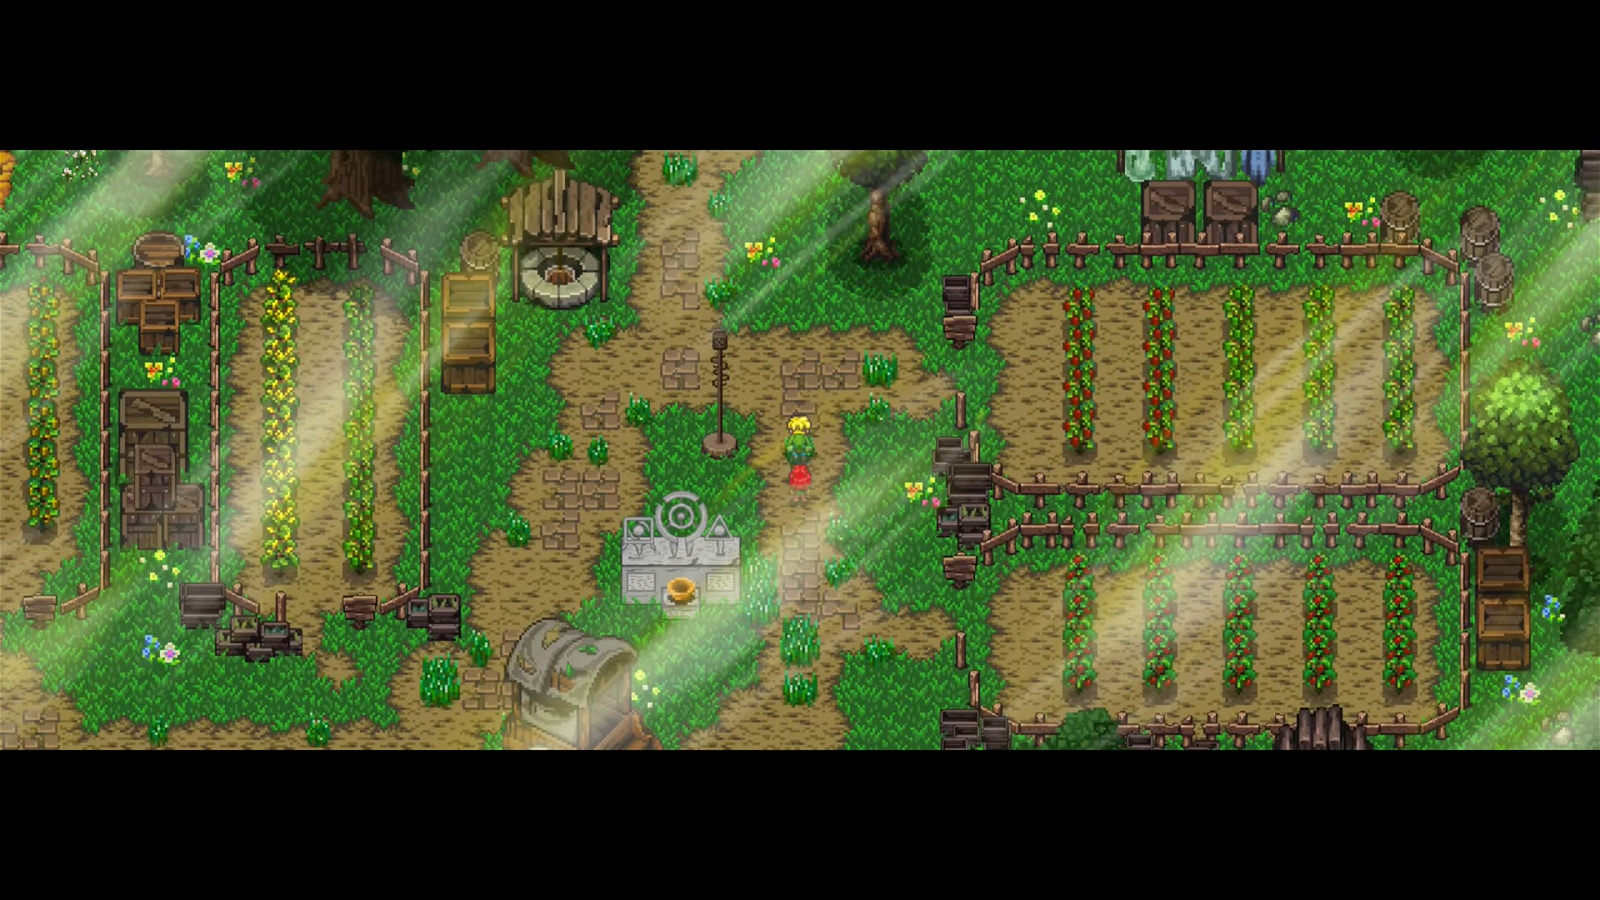 Screengrab of the gameplay from the trailer for Harvest Island.